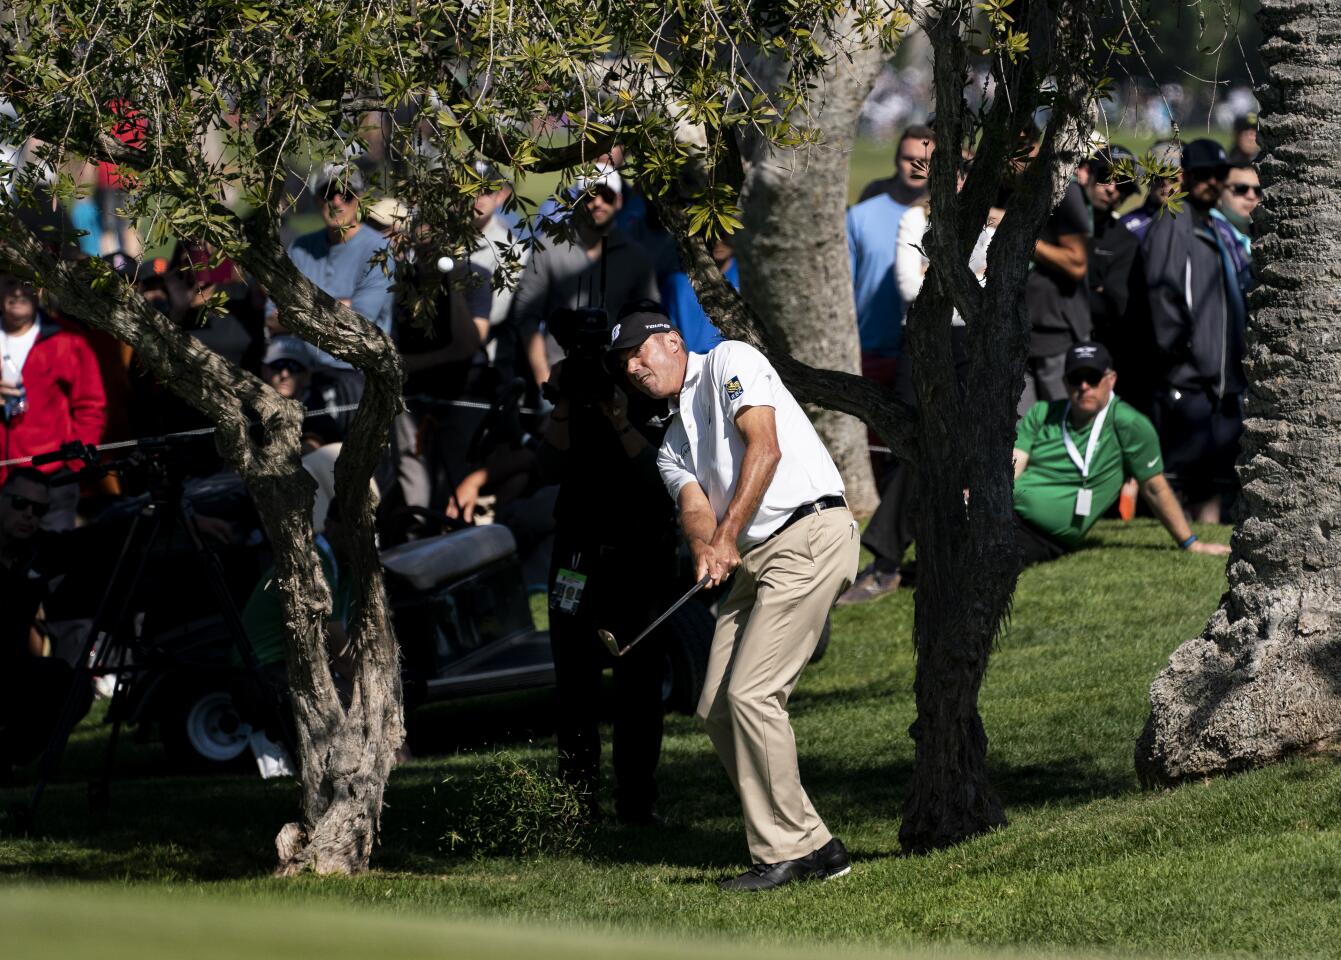 Matt Kuchar chips out of the rough on the 10th hole during the final round of the Genesis Invitational at Riviera Country Club on Feb. 16, 2020.